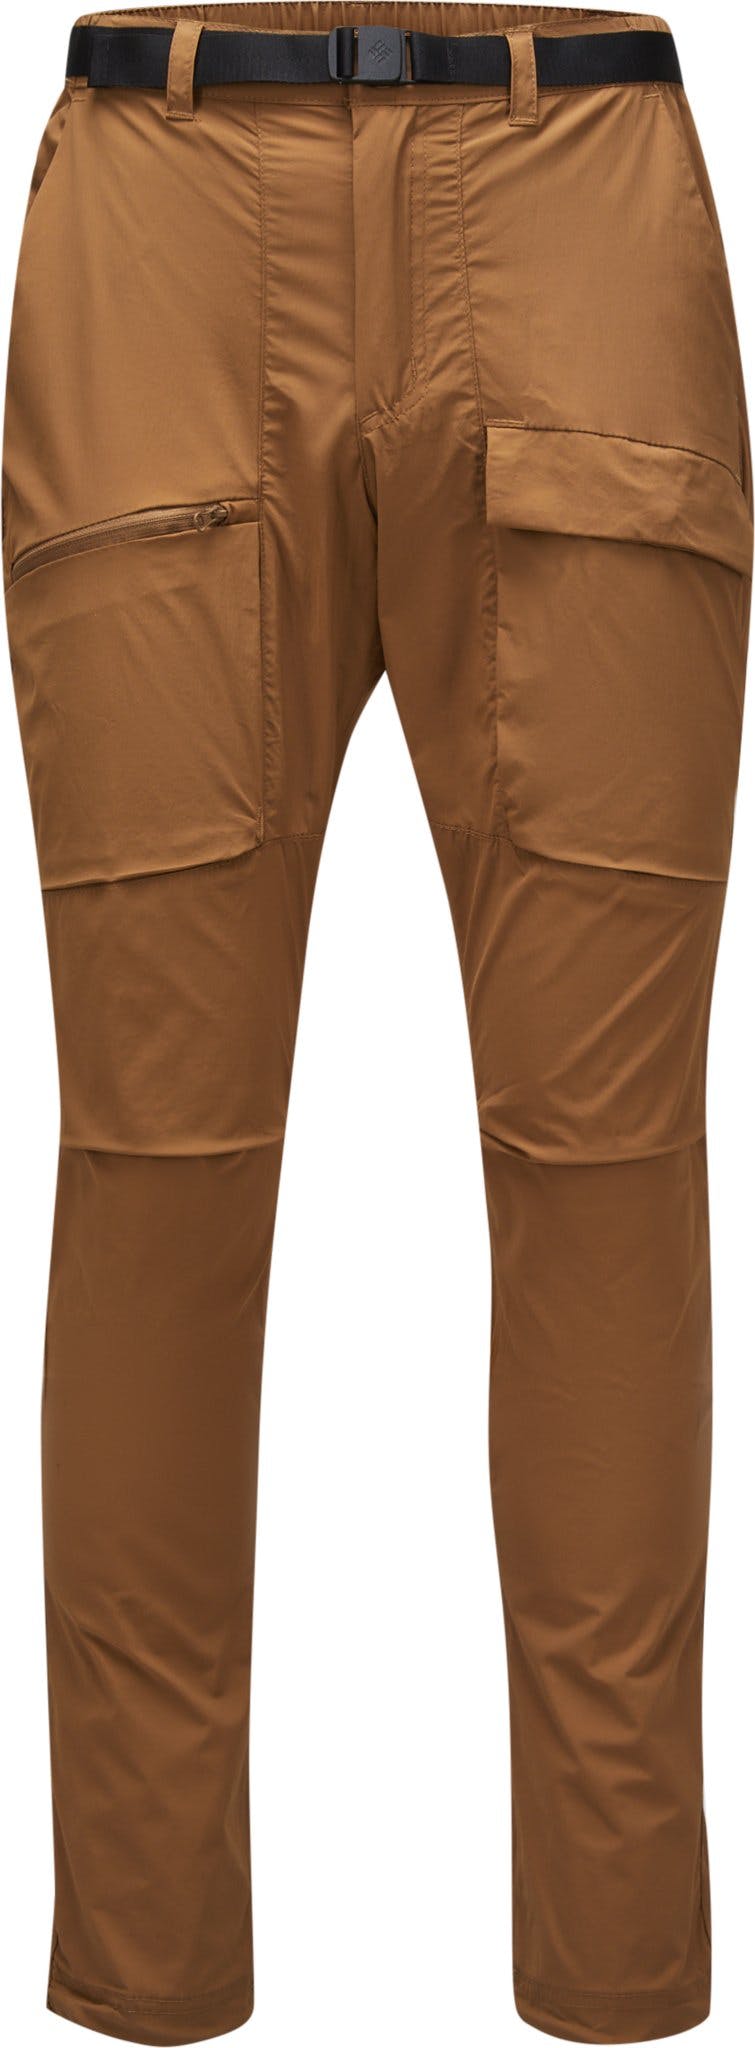 Product image for Maxtrail Lite Pant - Men's